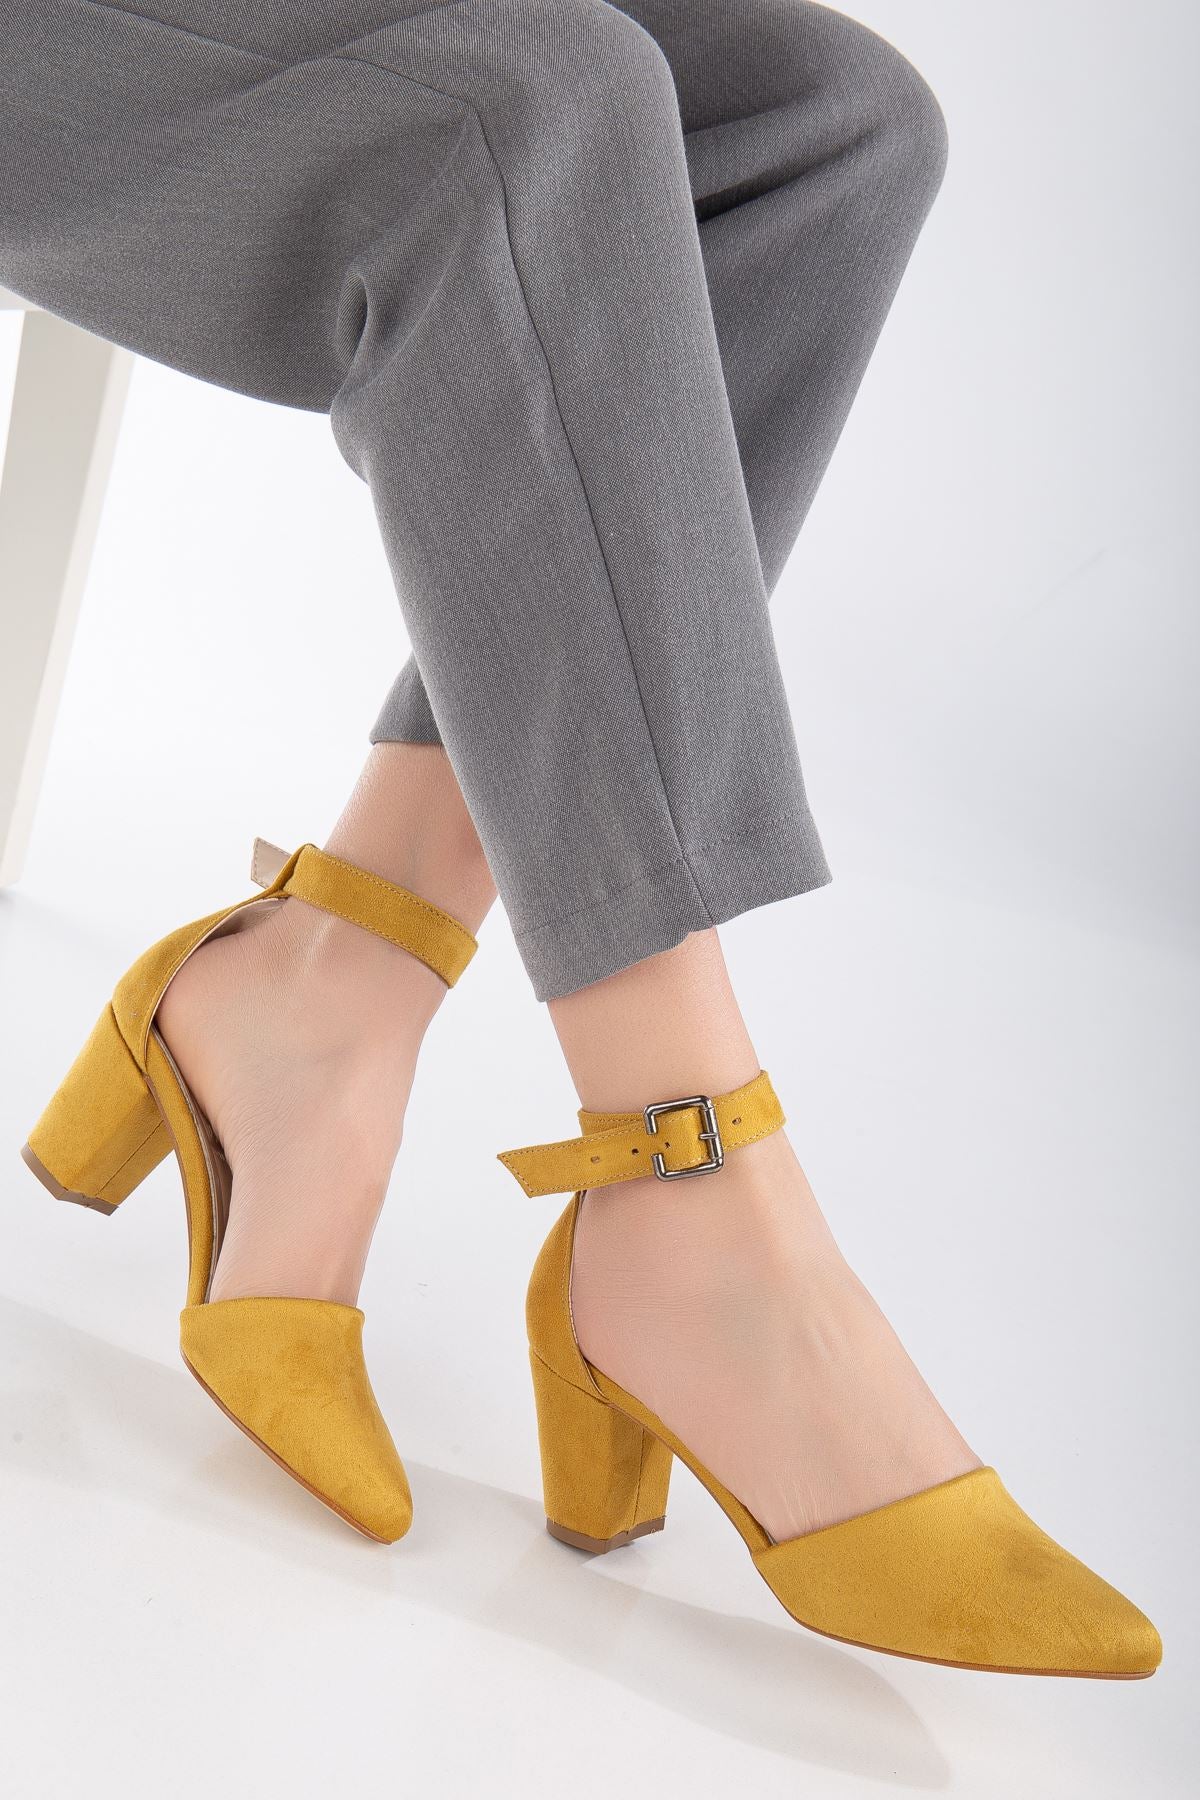 Lottis Mustard Suede Detailed Heeled Women's Shoes - STREETMODE™